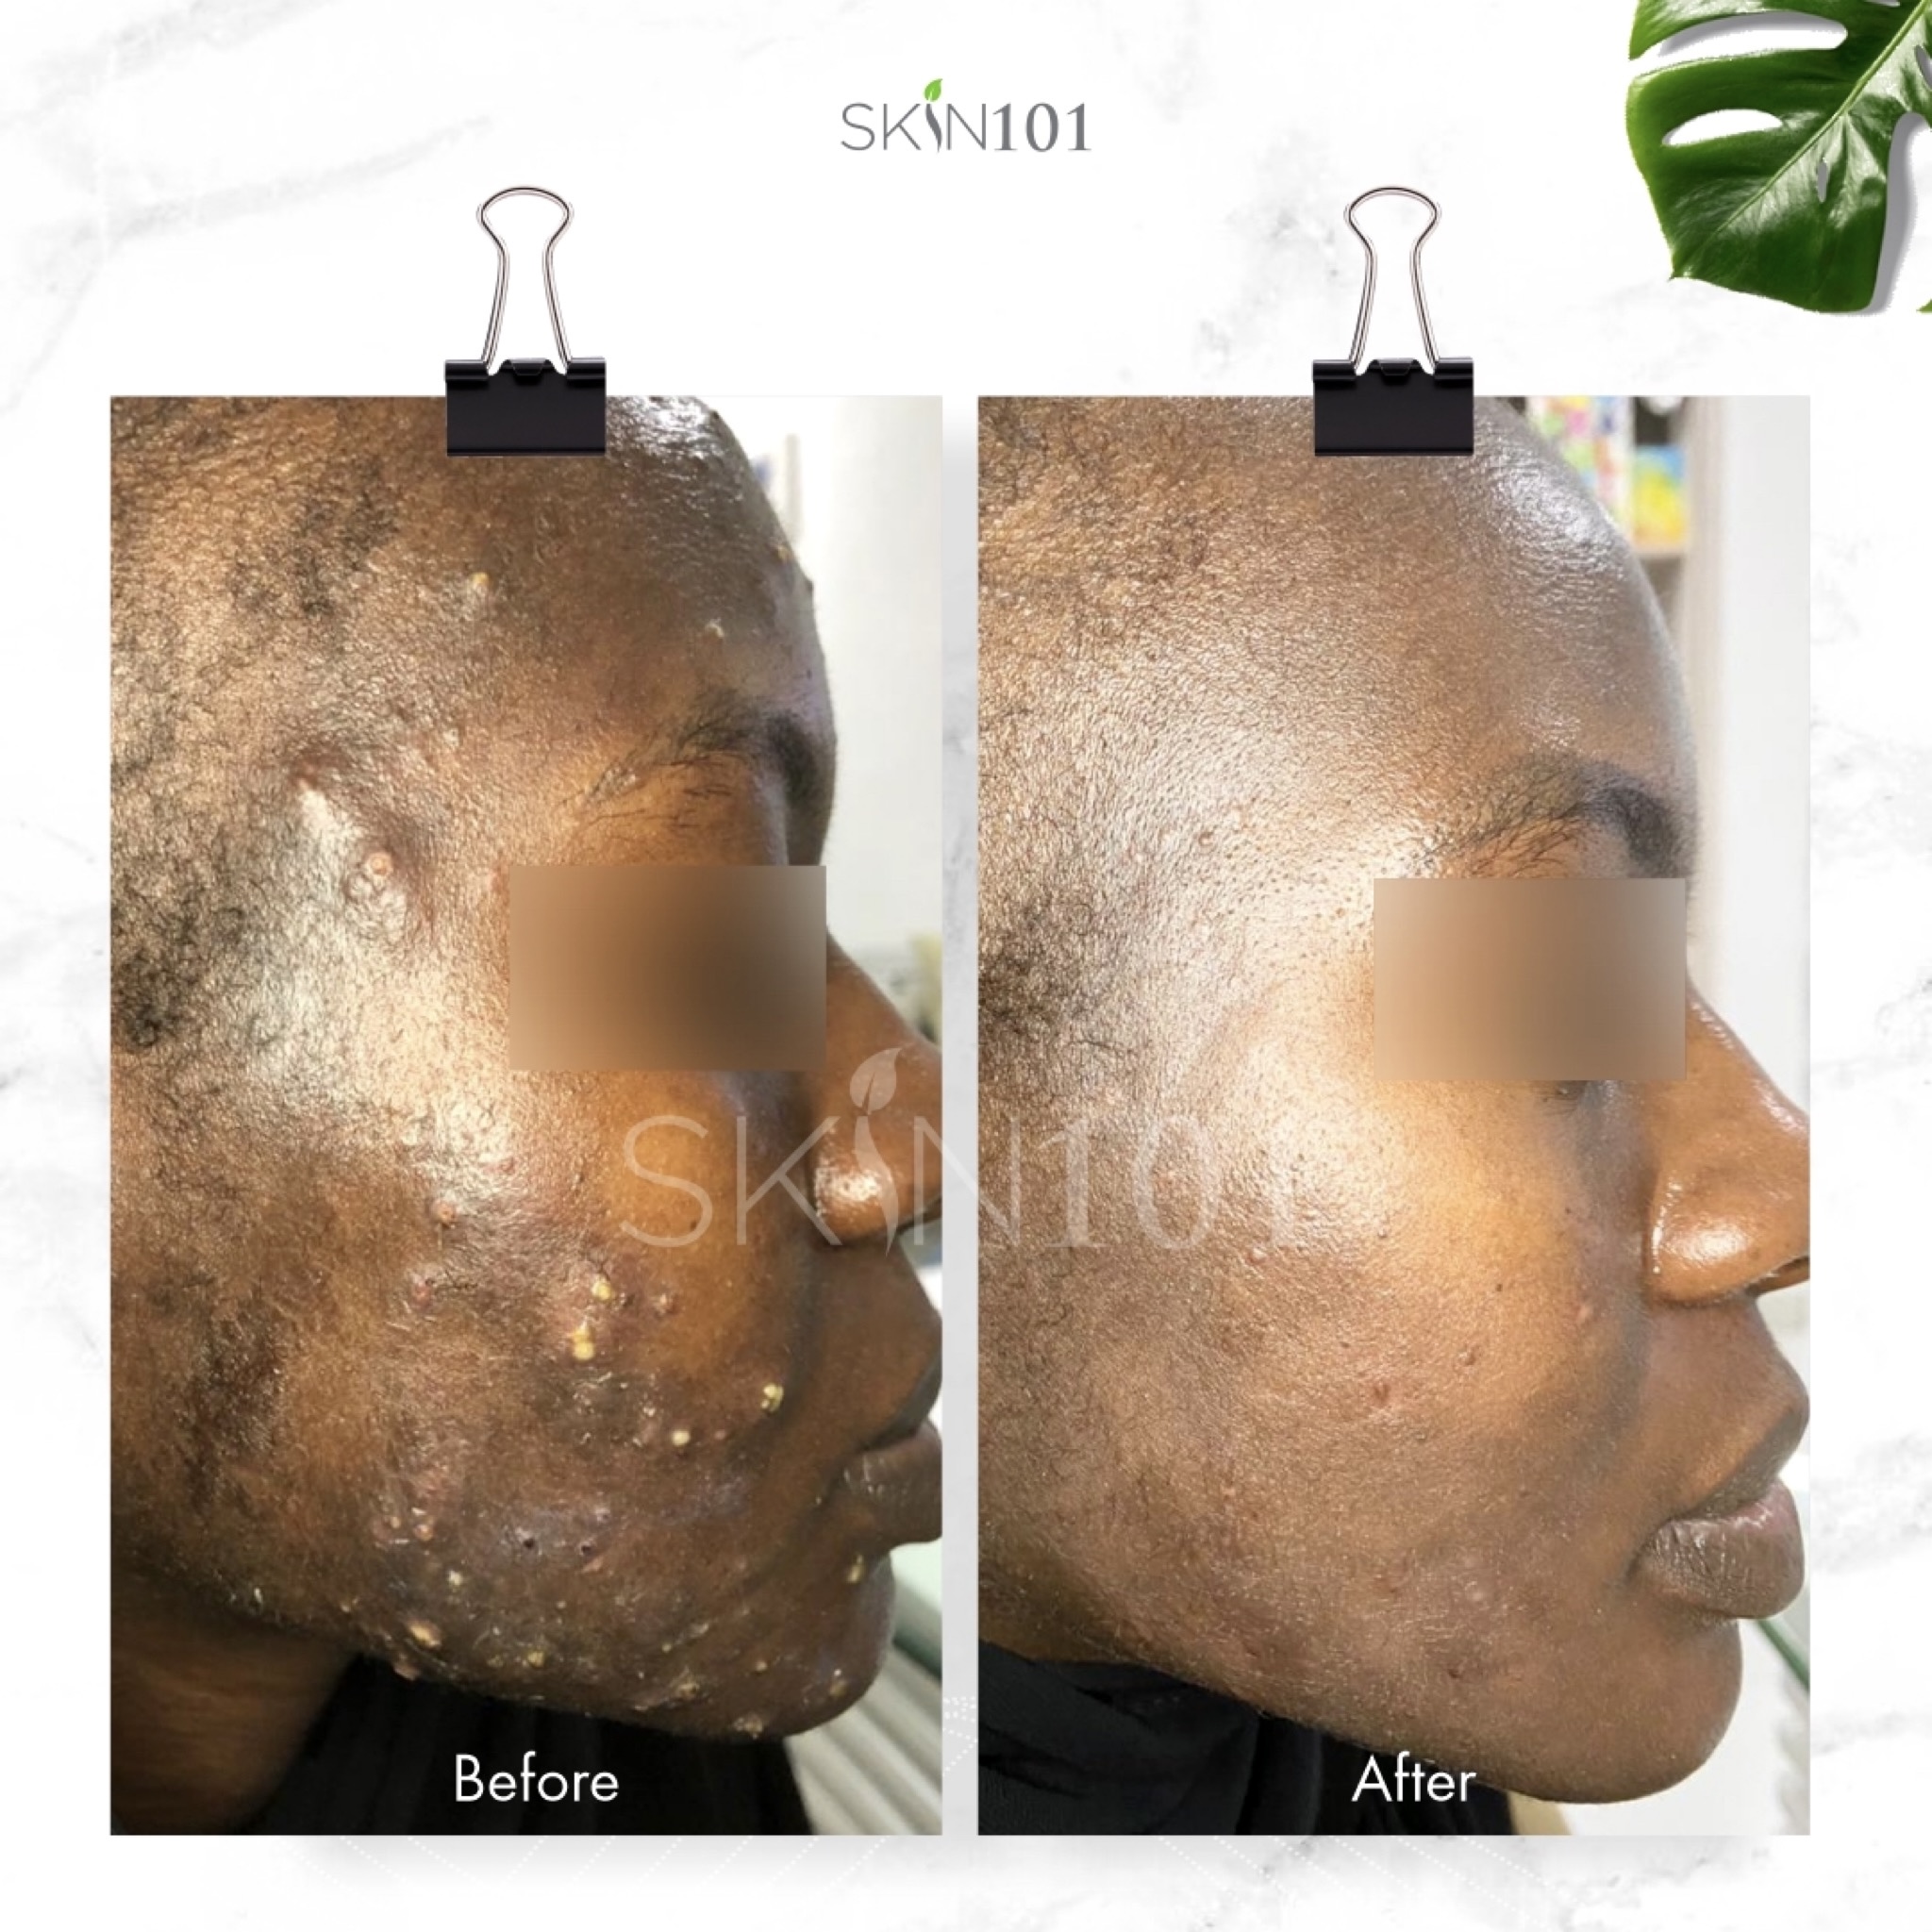 Severe Acne Treatment Before and After